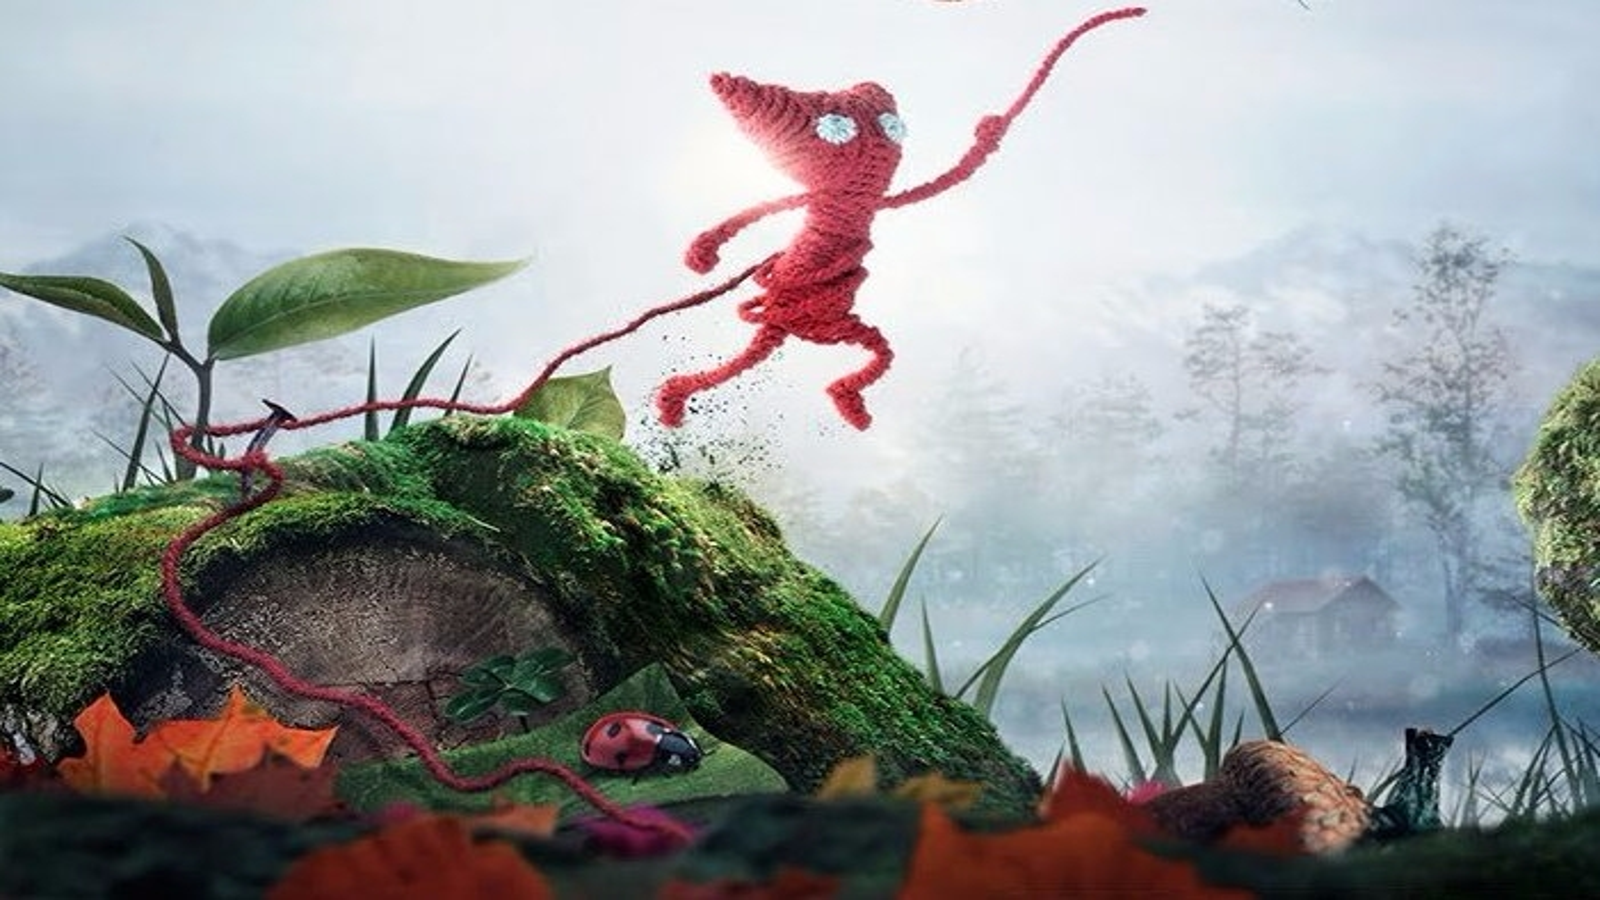 Unravel Two Review - Teamwork Makes the Dream Work